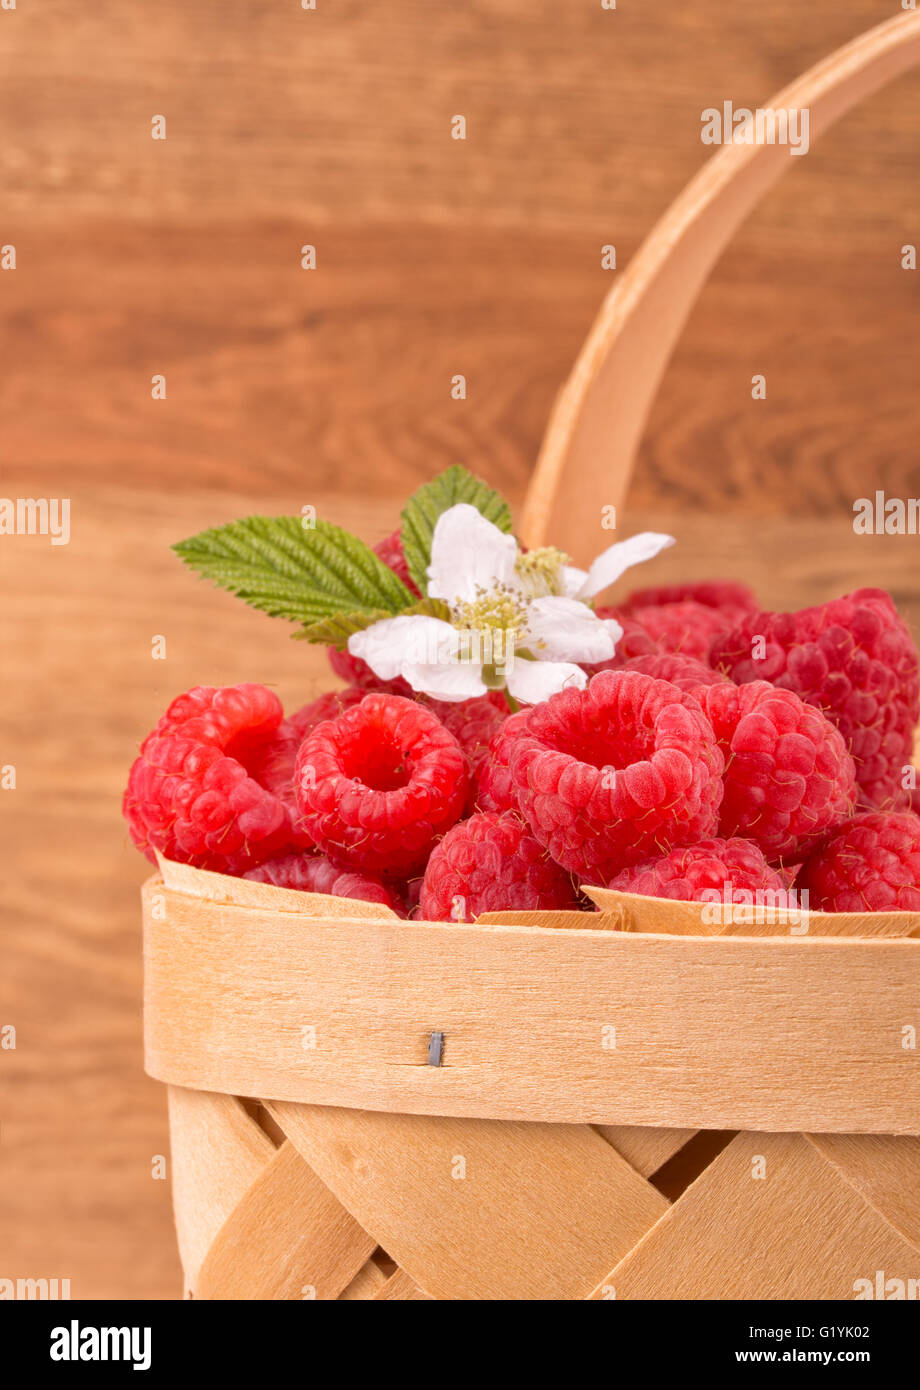 Basket with fresh raspberries, against wooden background Stock Photo